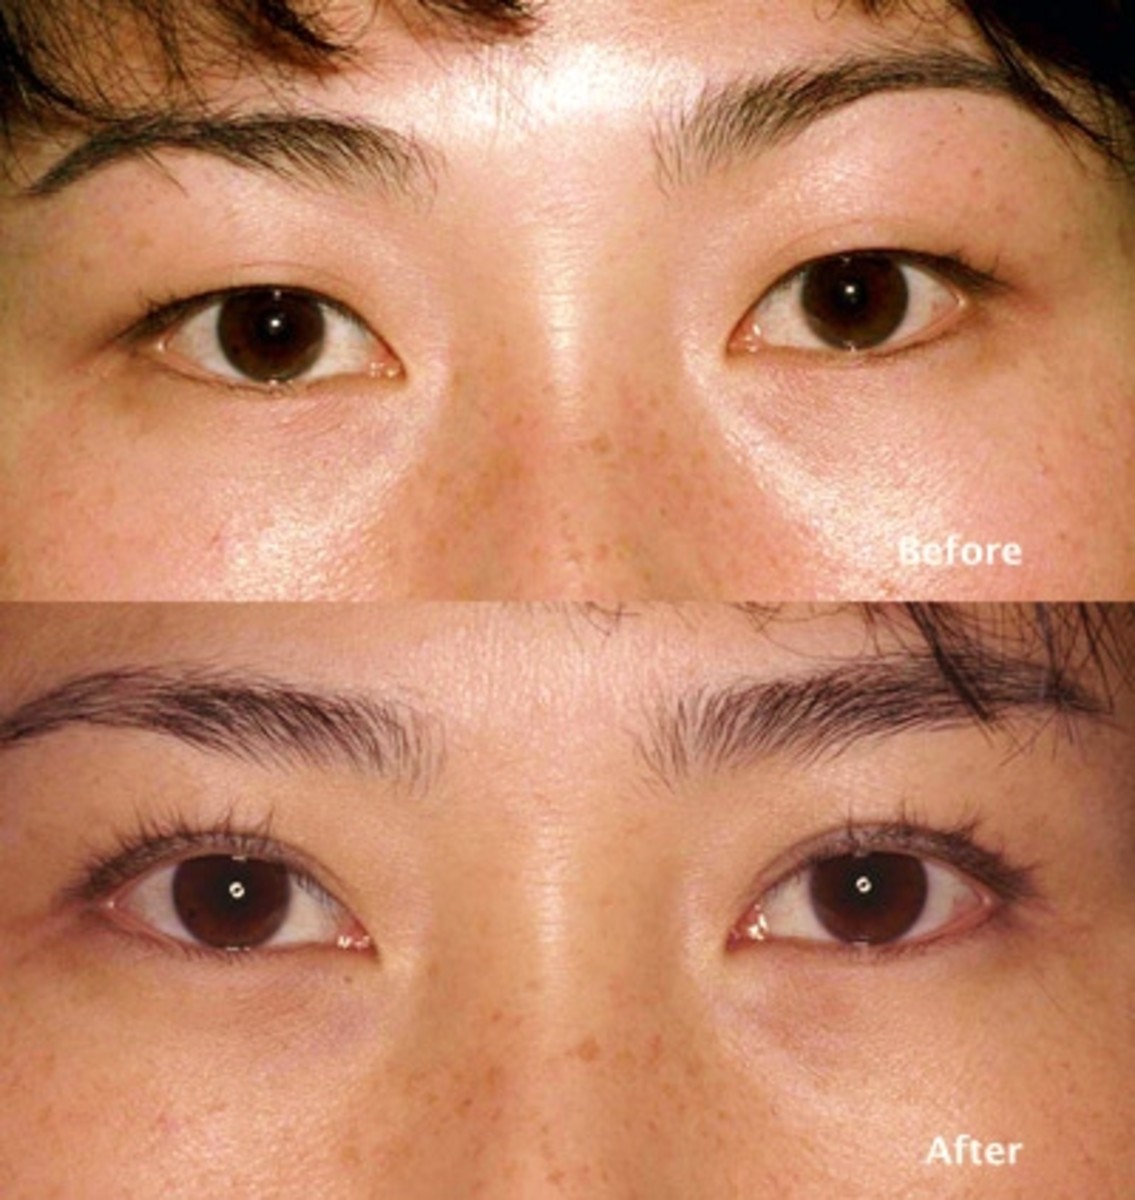 asian-eyelid-surgery-before-and-after-and-cost-of-procedure